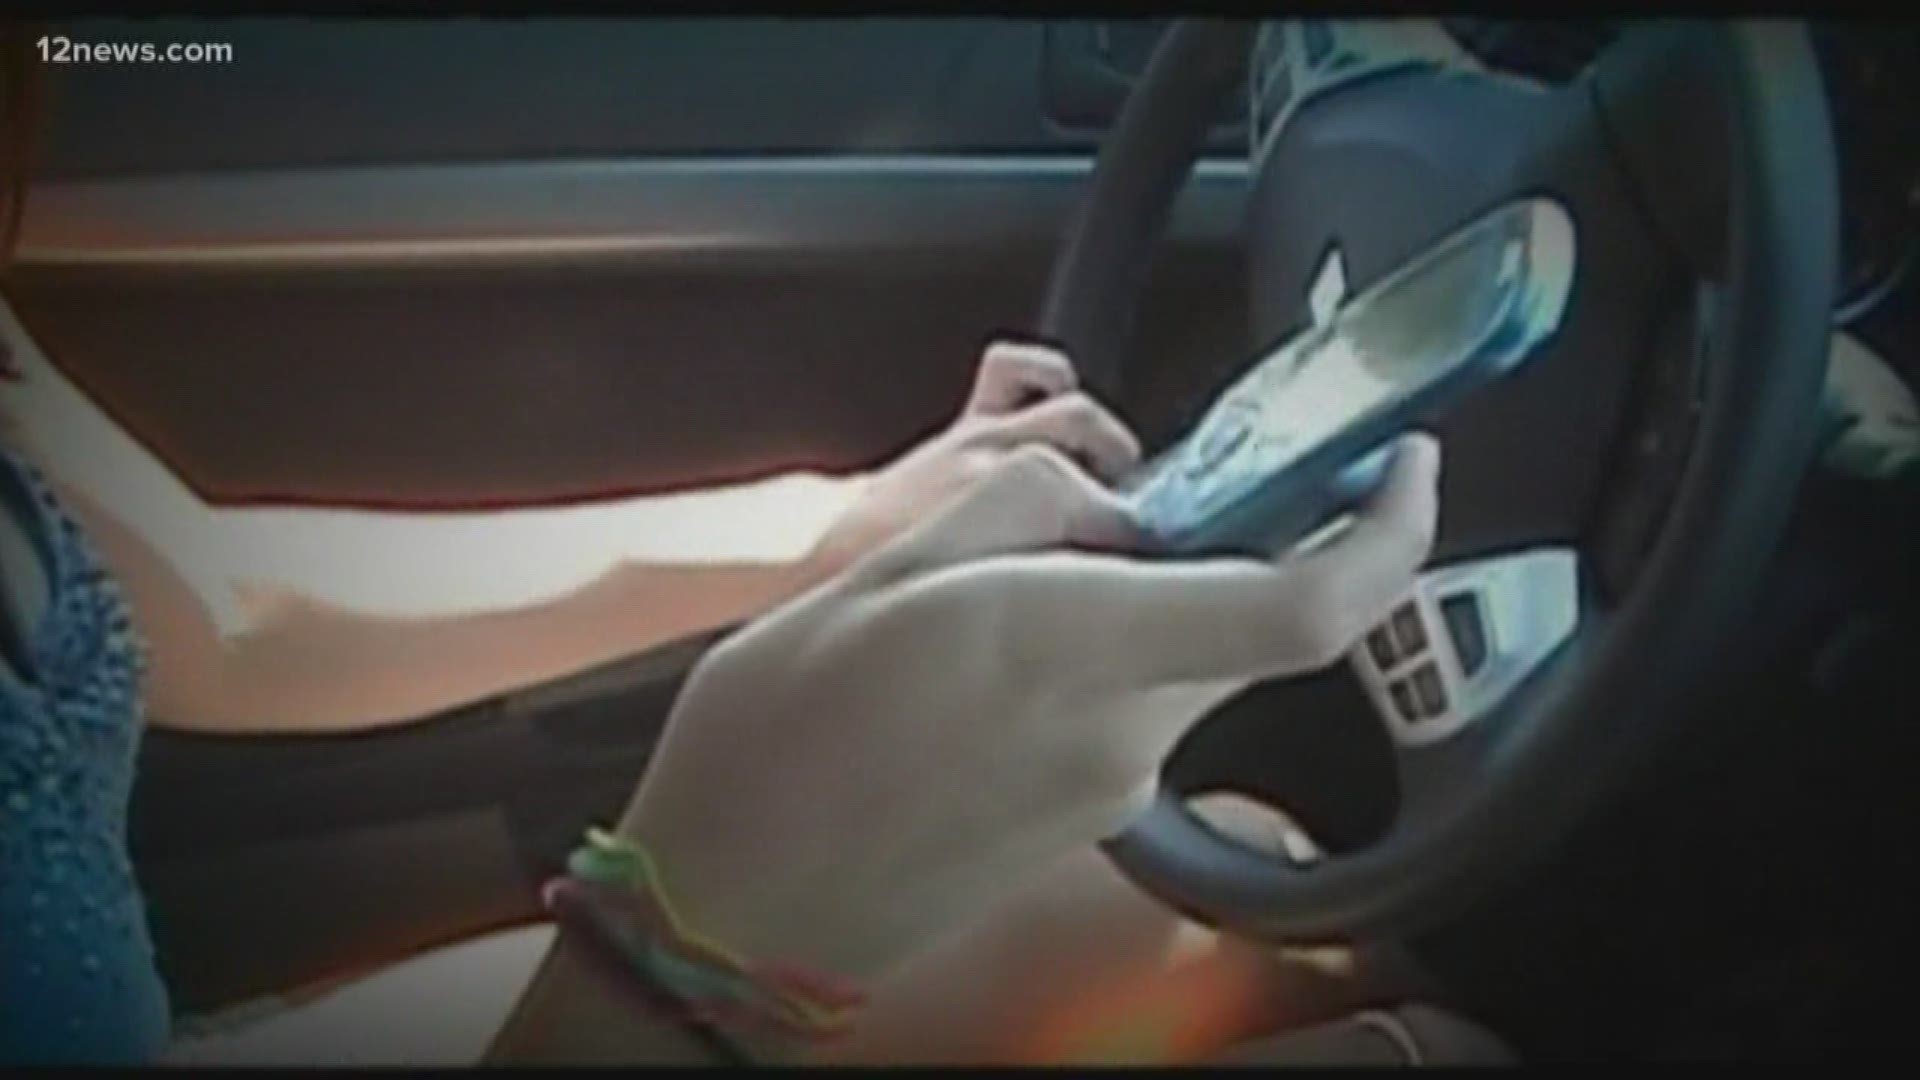 The laws about cell phone use while driving vary across the state. City leaders in Surprise are considering the strictest ban in the state.